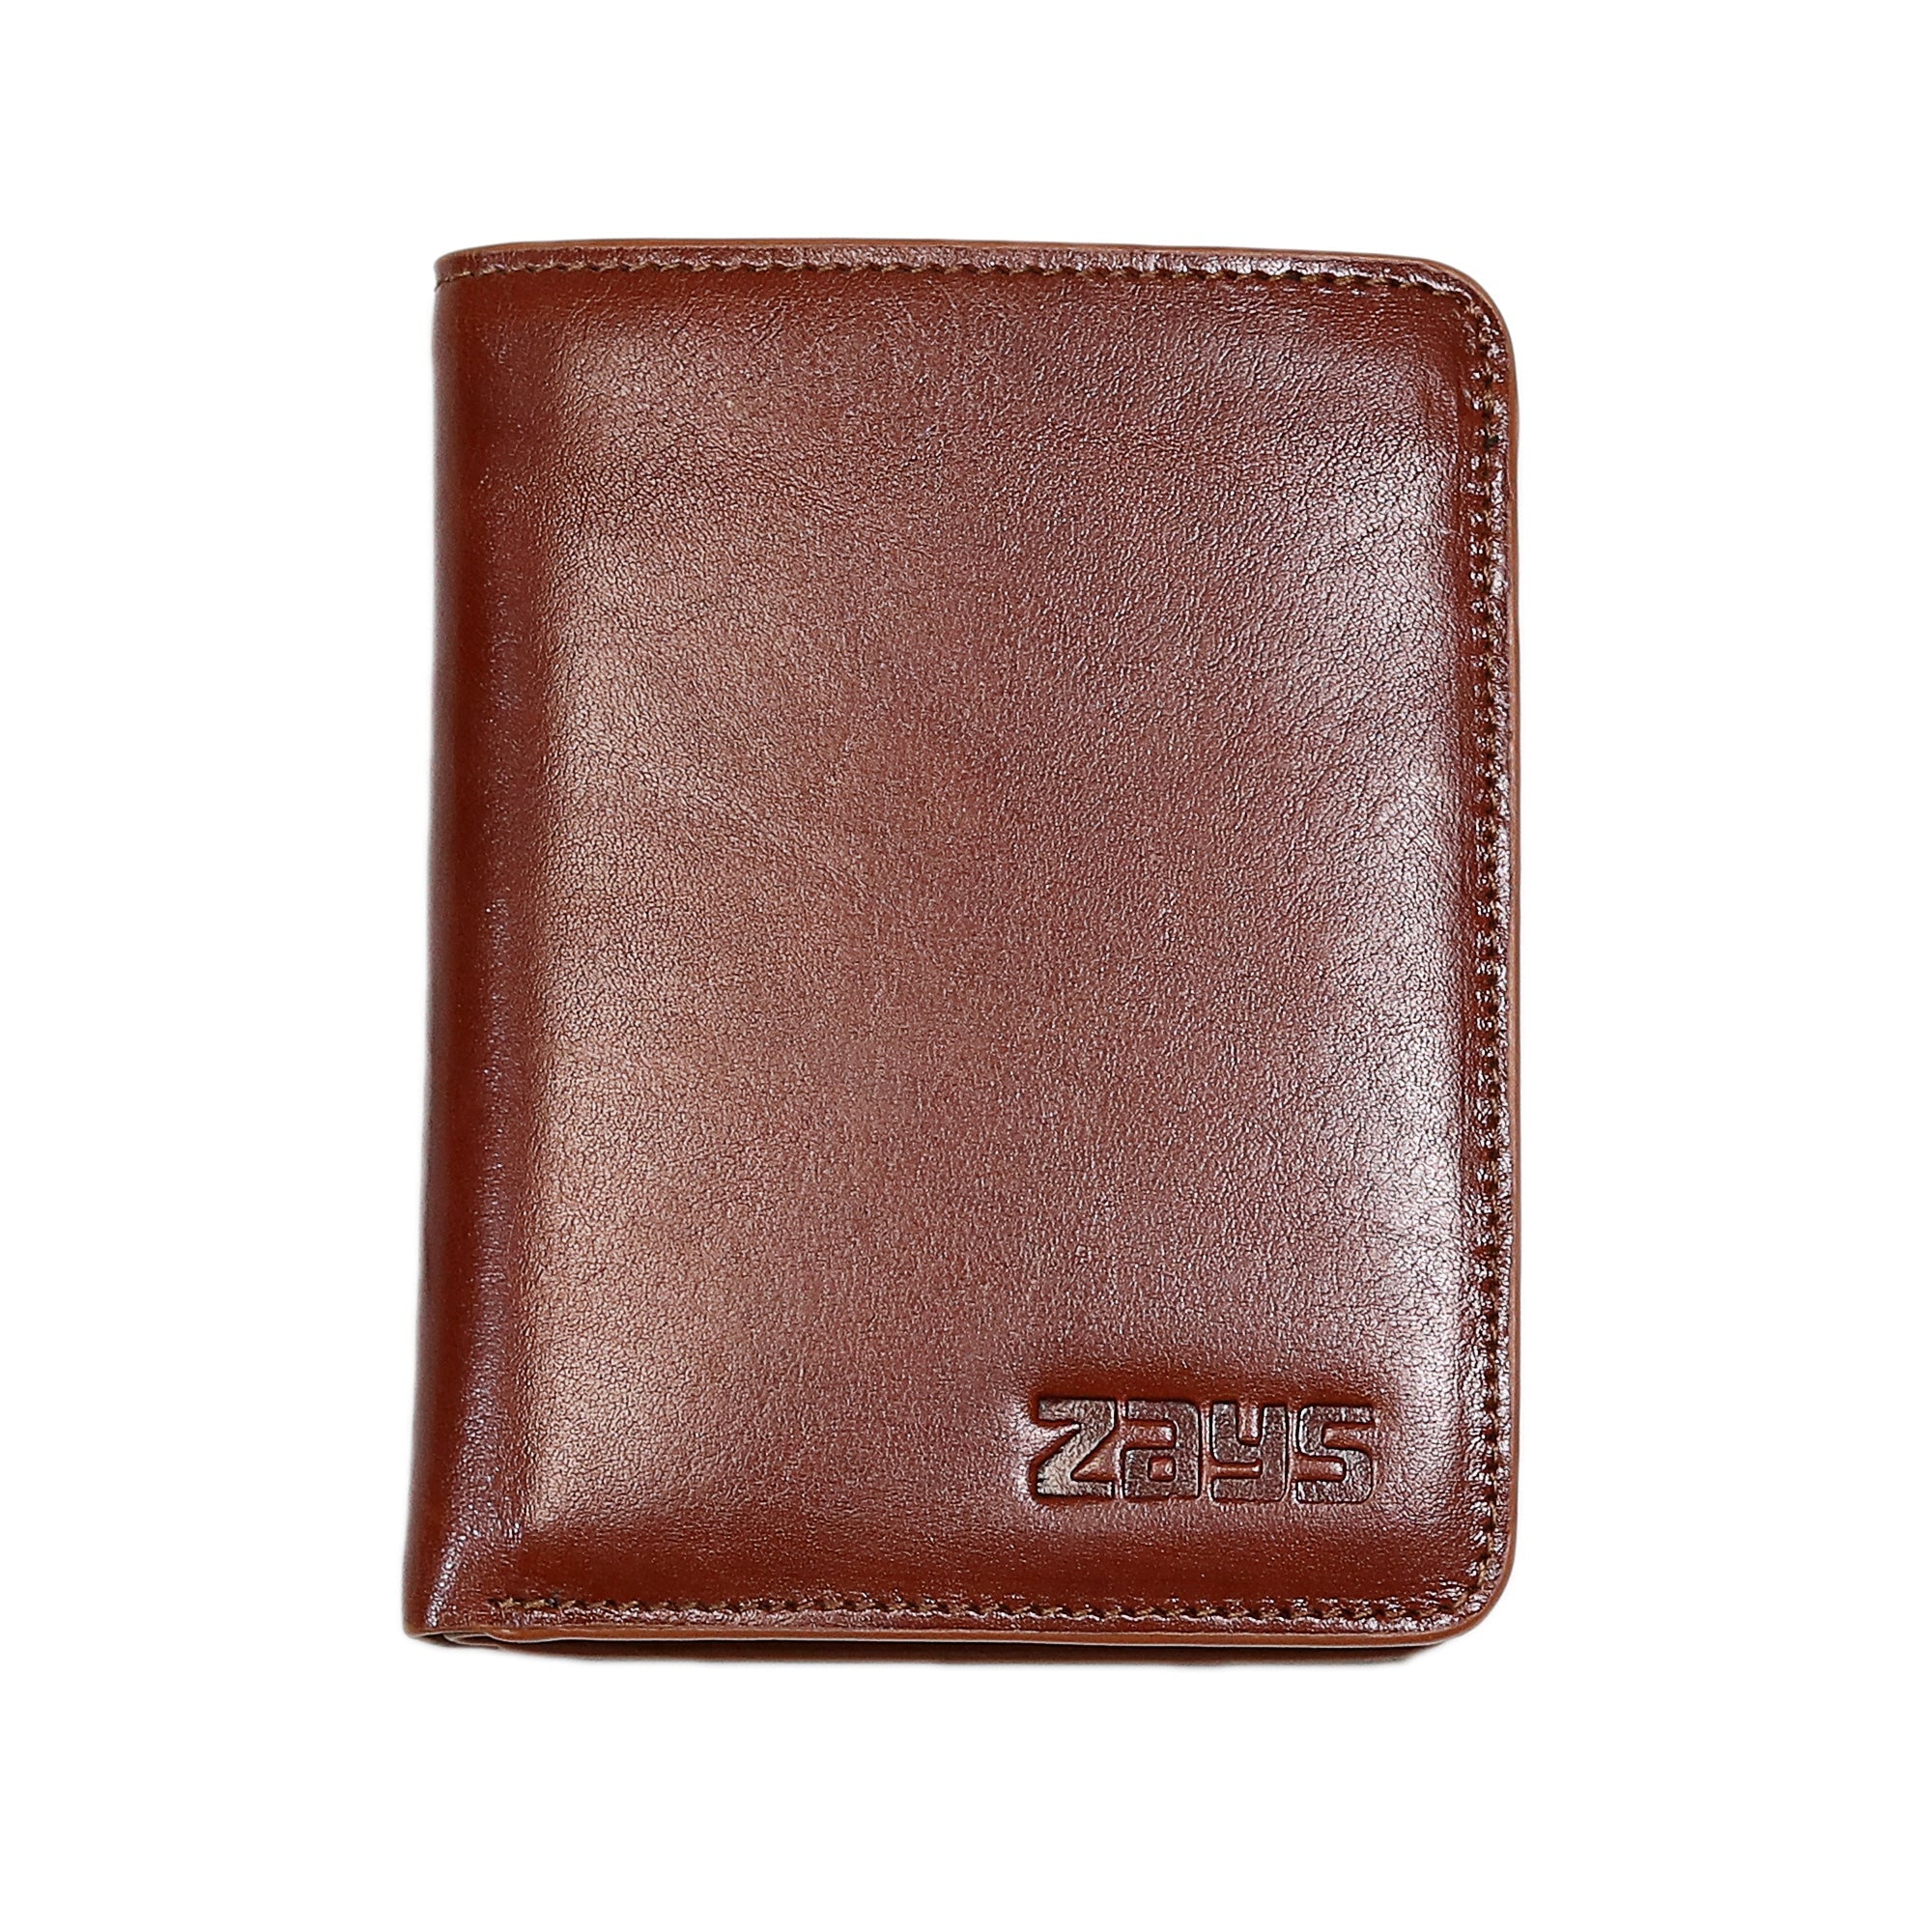 Zays Oil Pull Up Leather Wallet for Men - Deep Brown (WL44)